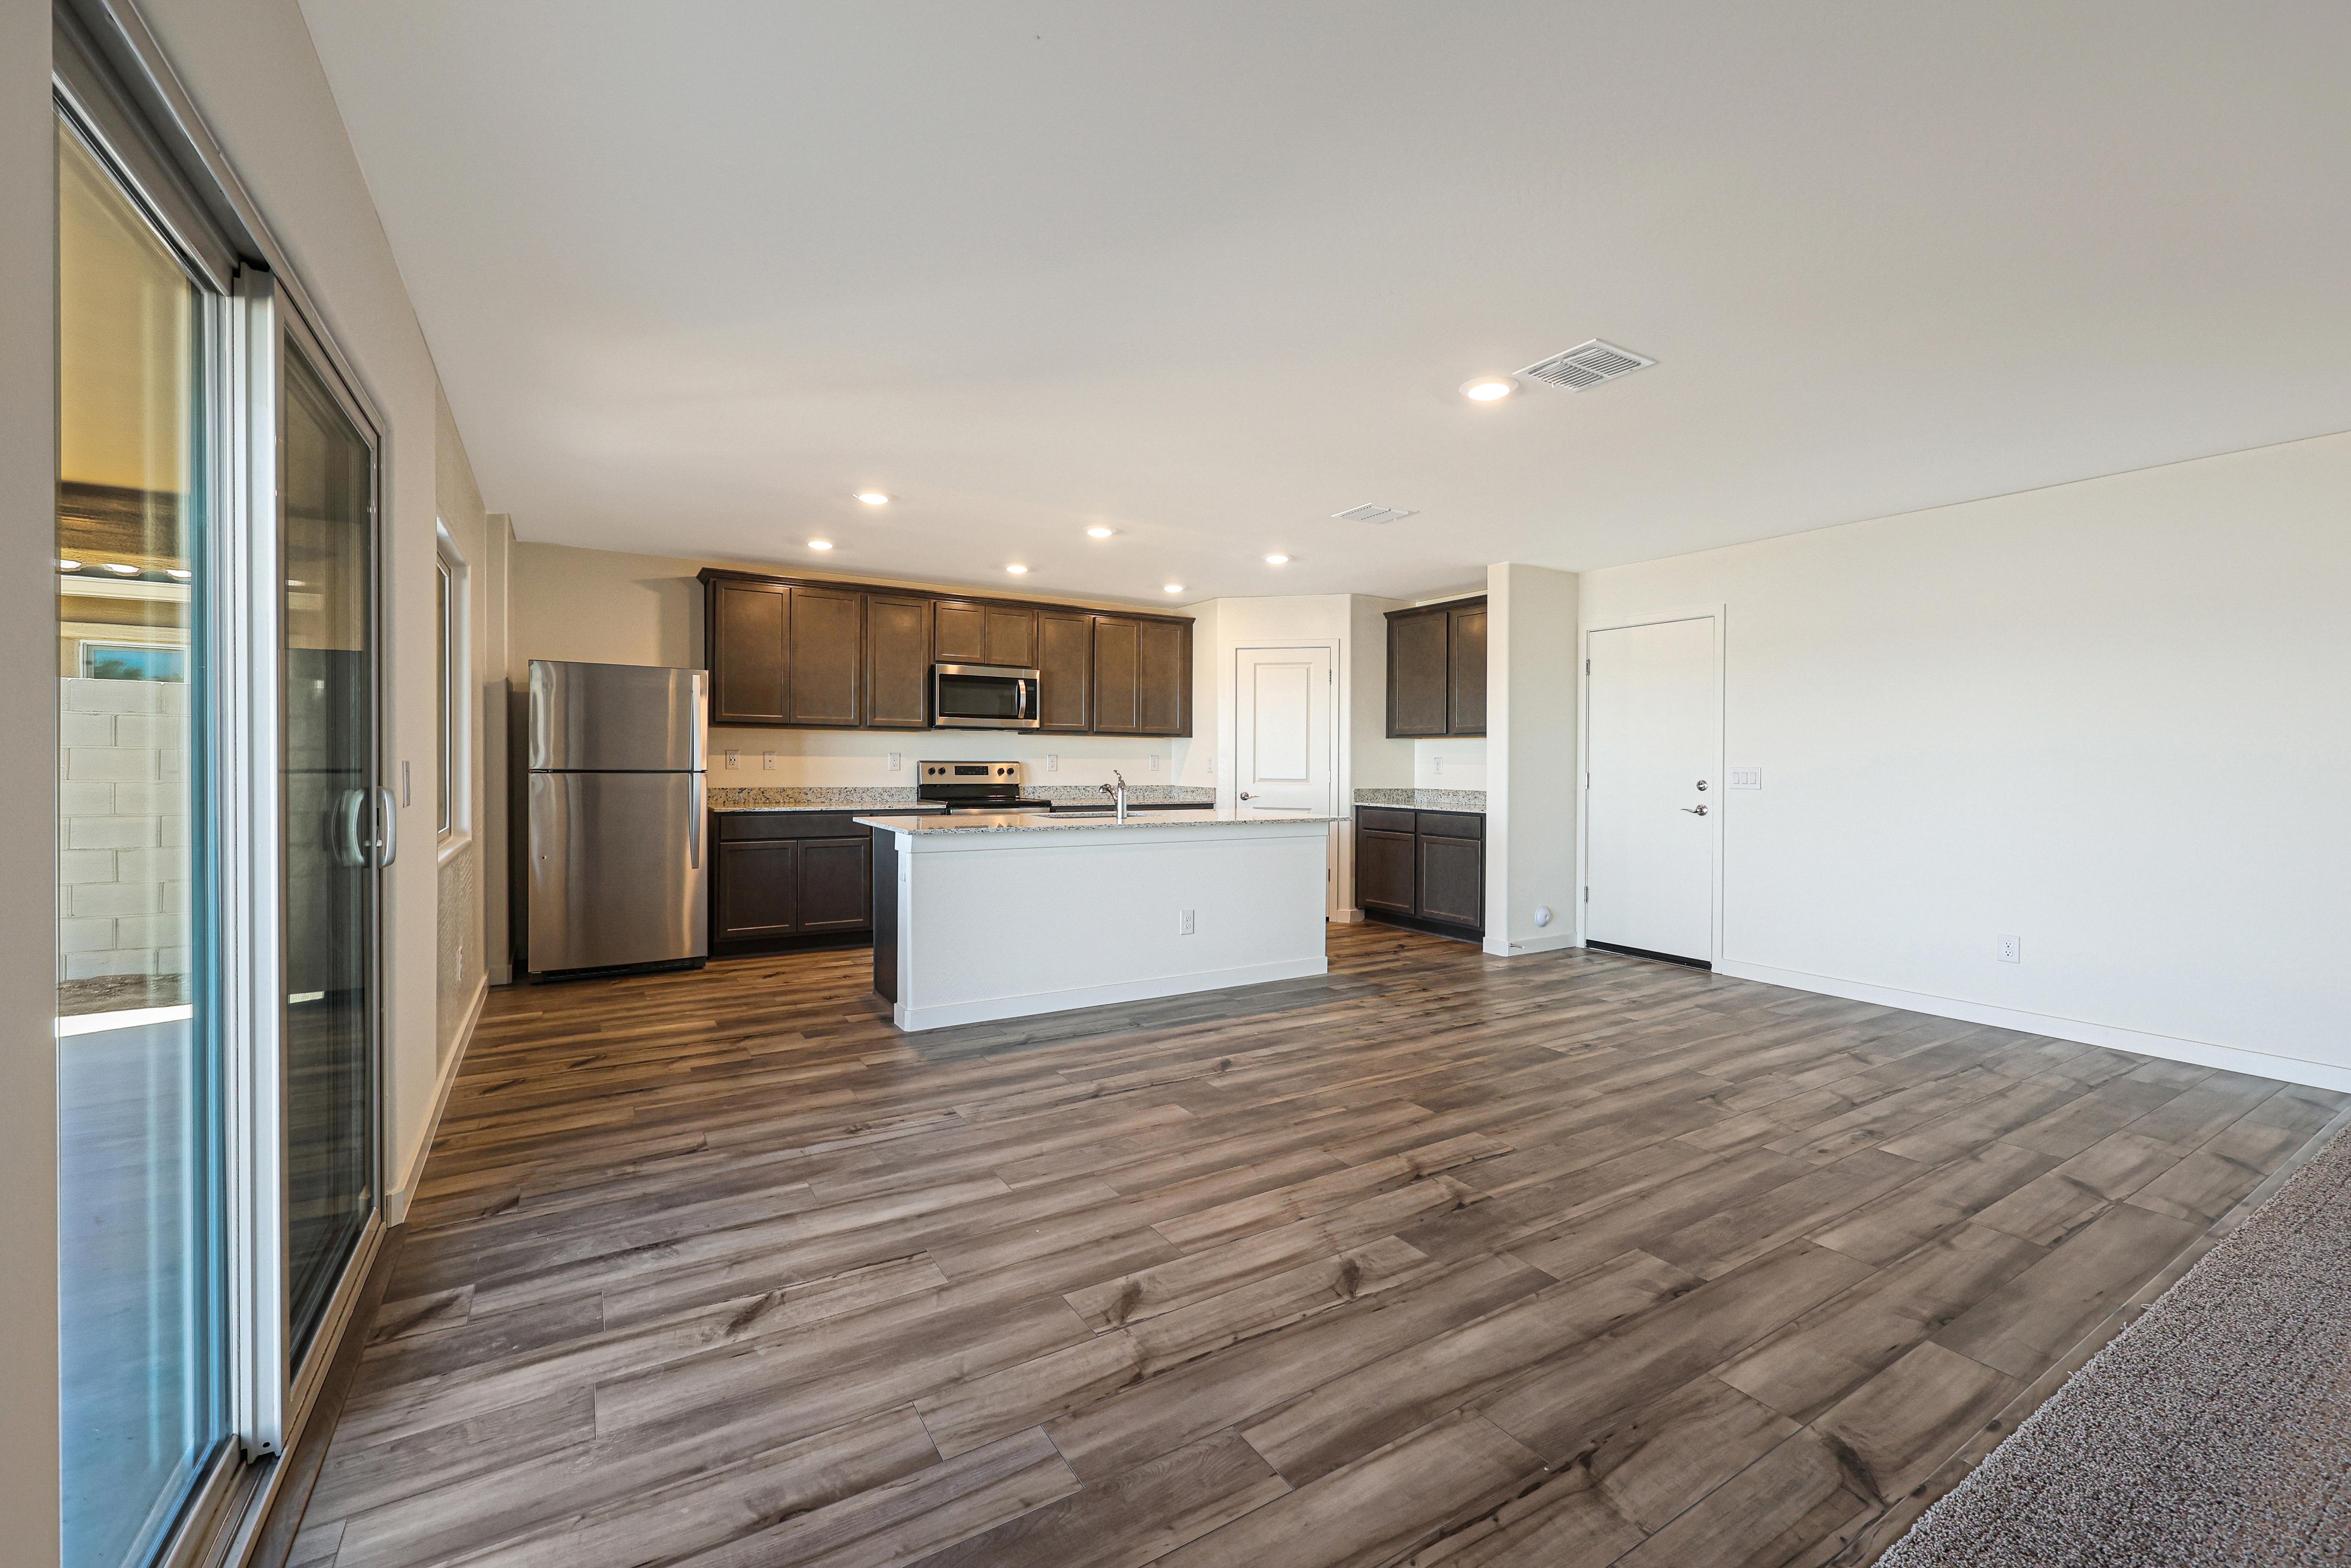 The spacious kitchen is perfect for preparing your family's favorite meals and treats.